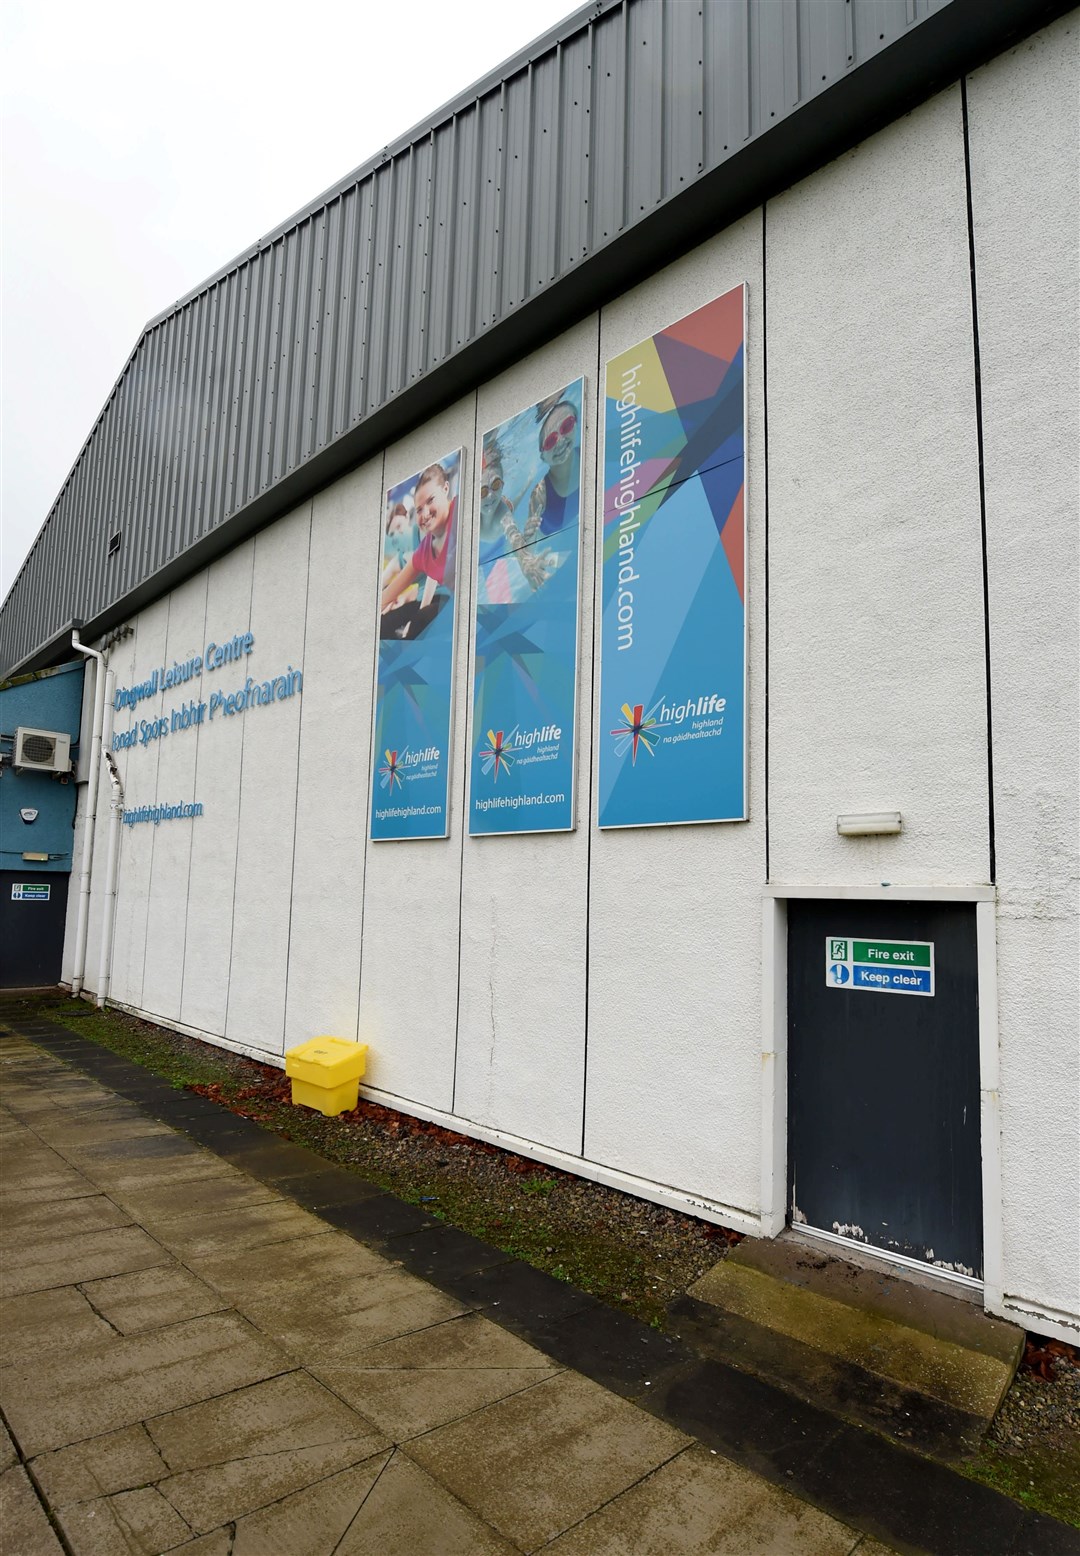 Dingwall Leisure Centre hosts a gym and swimming pool.